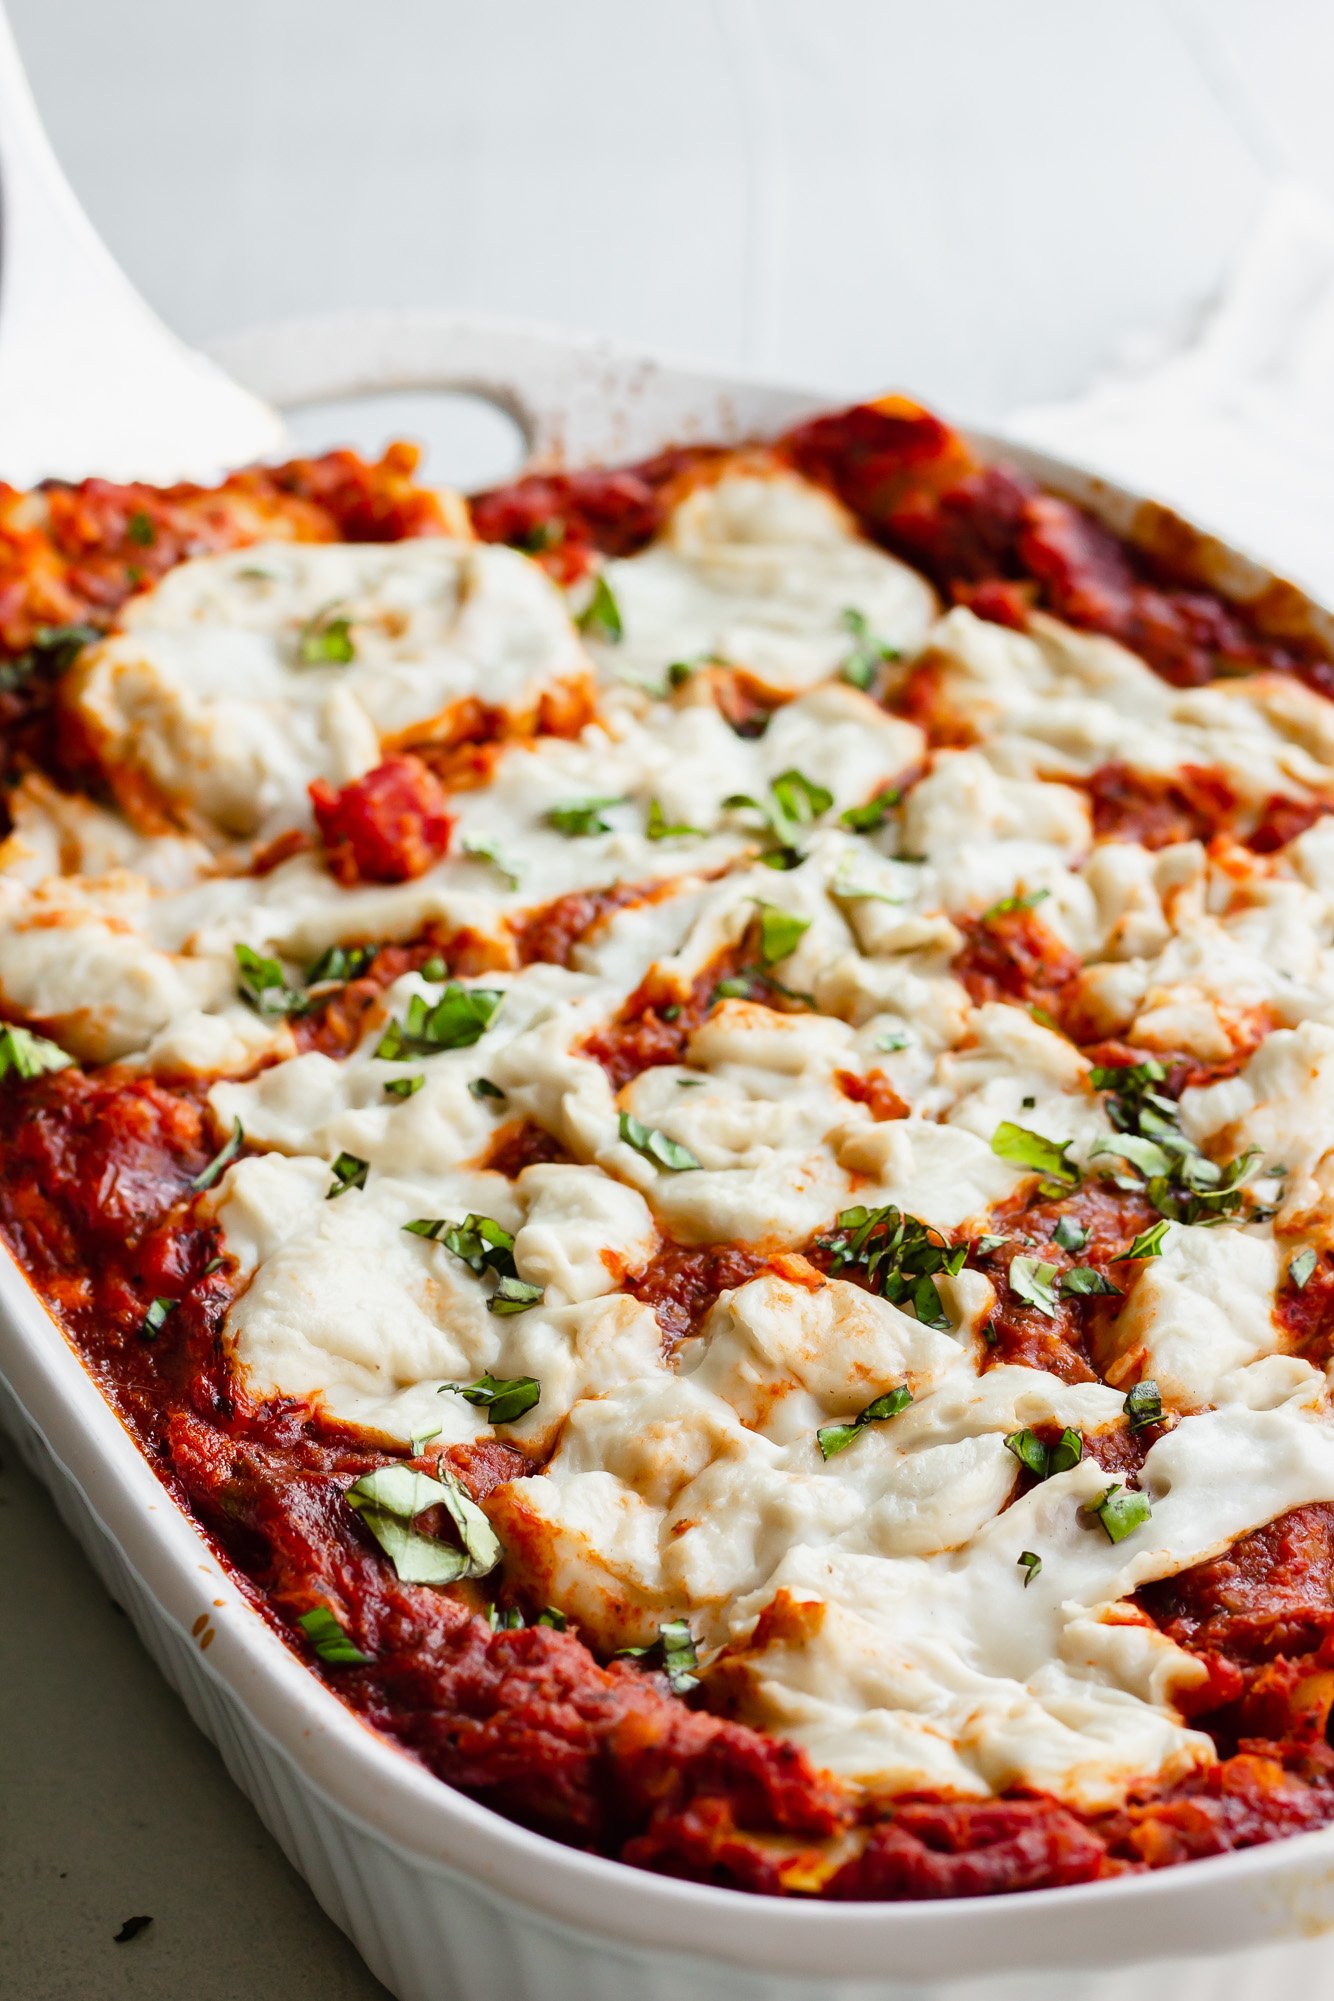 baked lasagna topped with vegan mozzarella cheese and red sauce in a white casserole dish.